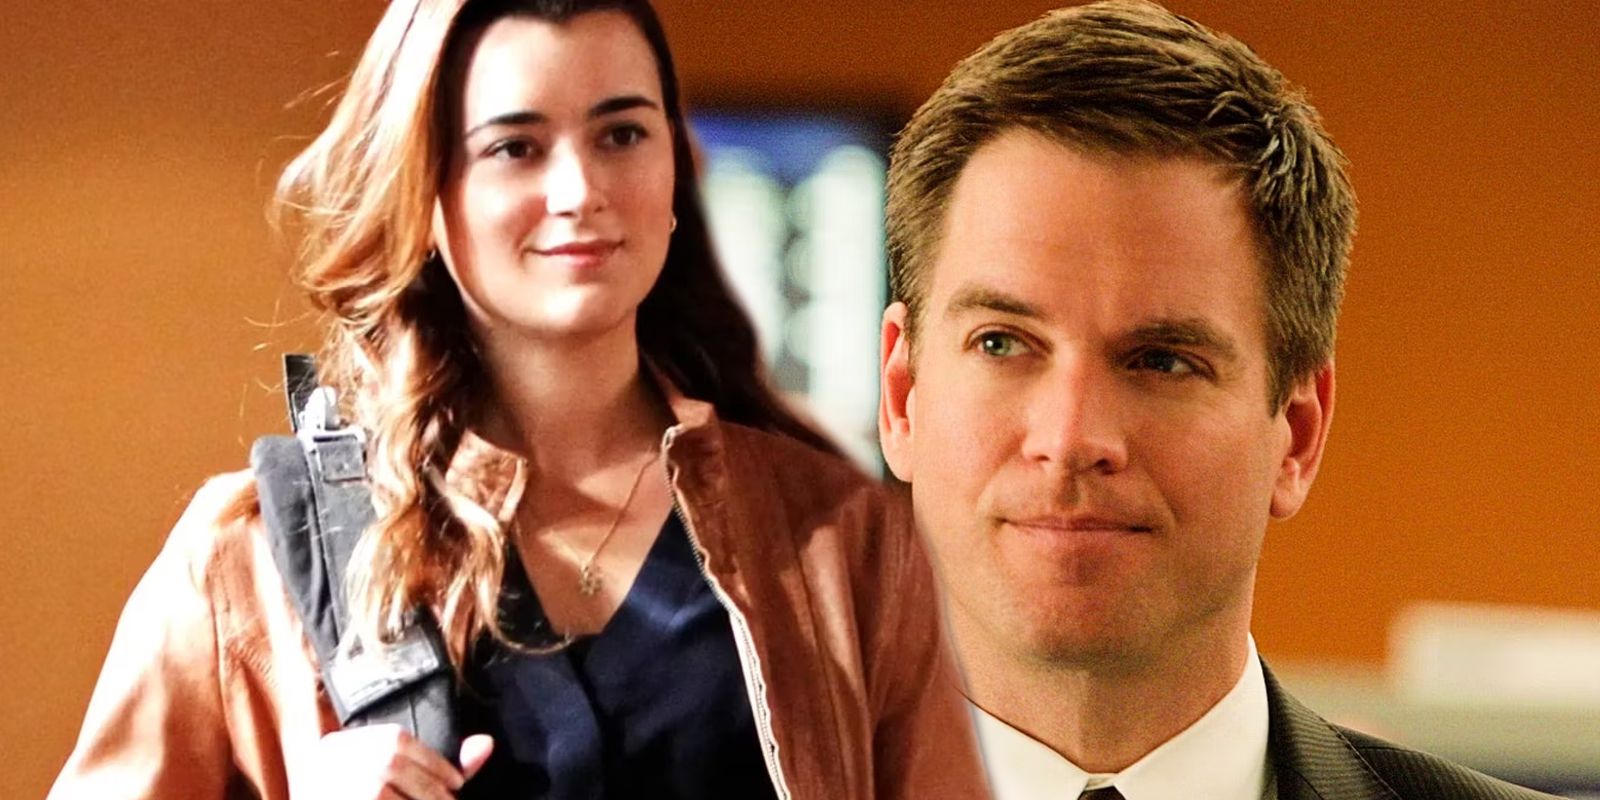 Michael Weatherly as Tony smiling and Cote de Pablo looking satisfied as Ziva in NCIS